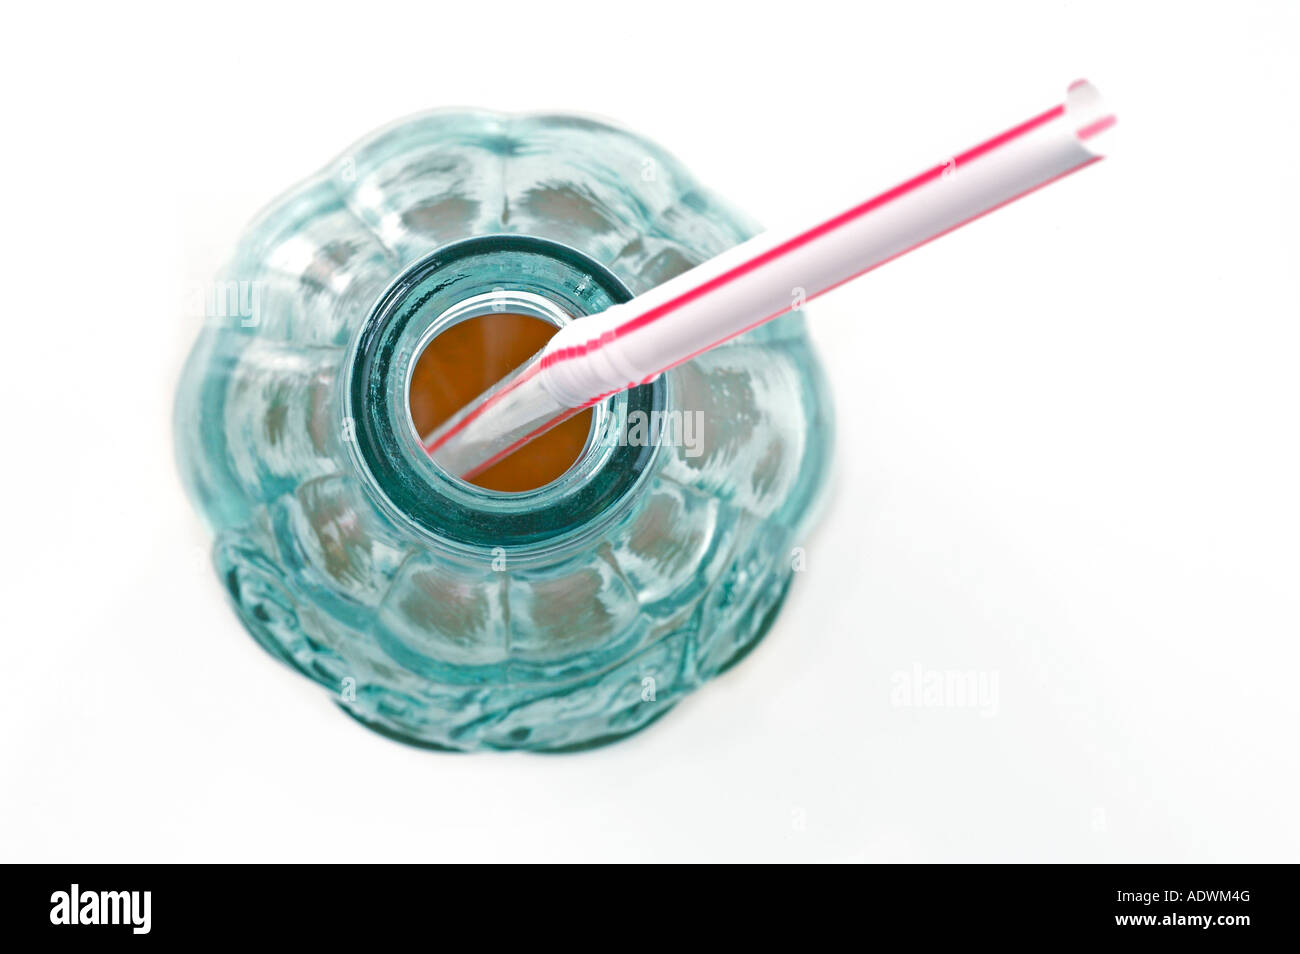 Coca cola bottle with a straw Stock Photo